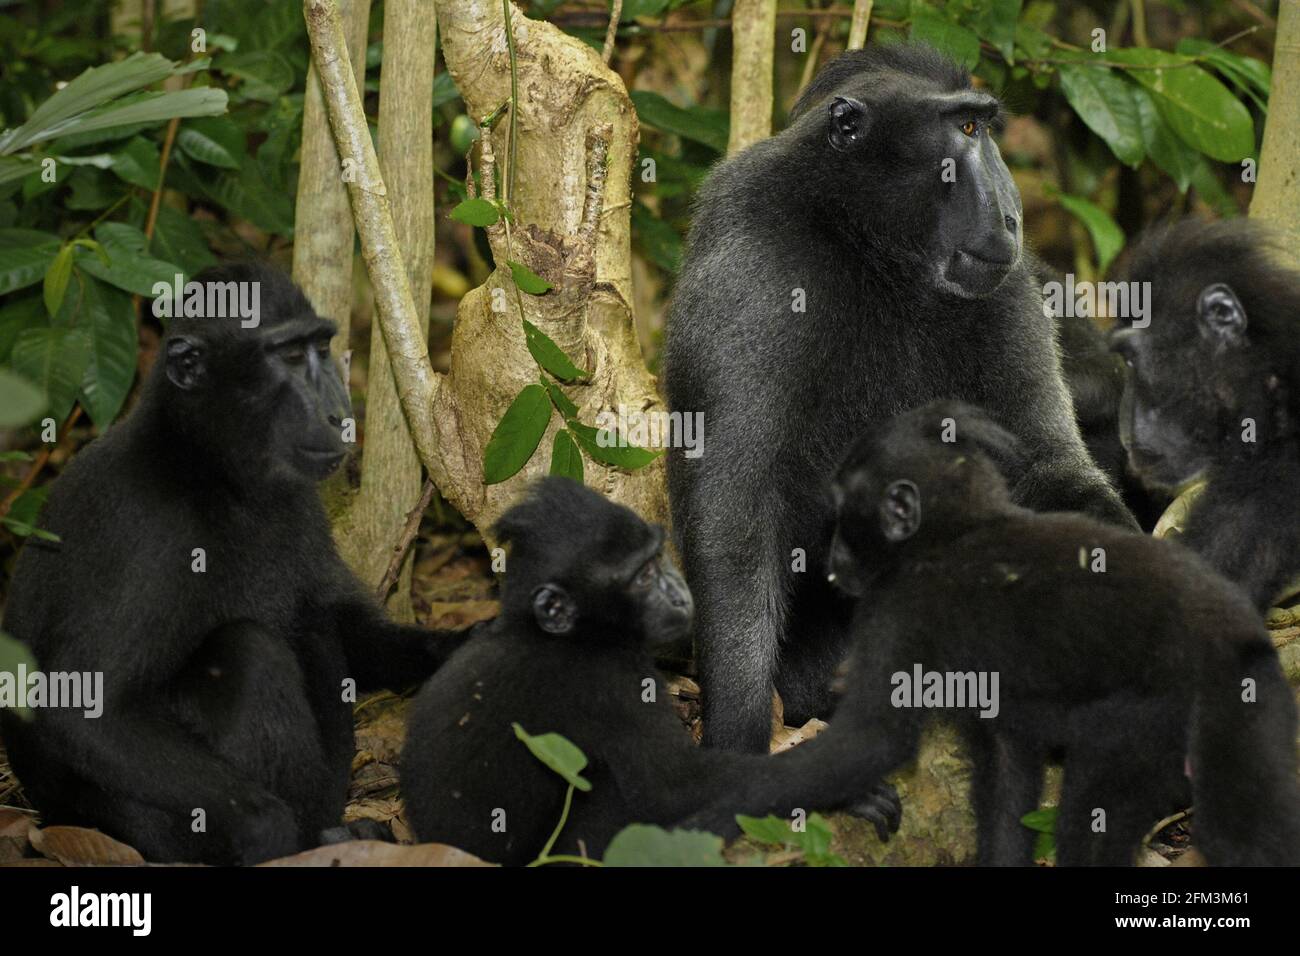 Crested macaque social activity. Adults with offsprings. In 'sociability' personality factor, a crested macaque male is identified by its 'high rate of grooming, high number of female neighbors, and diverse grooming network,' according to a team of scientists led by Christof Neumann in a scientific paper published in August 2013. Stock Photo